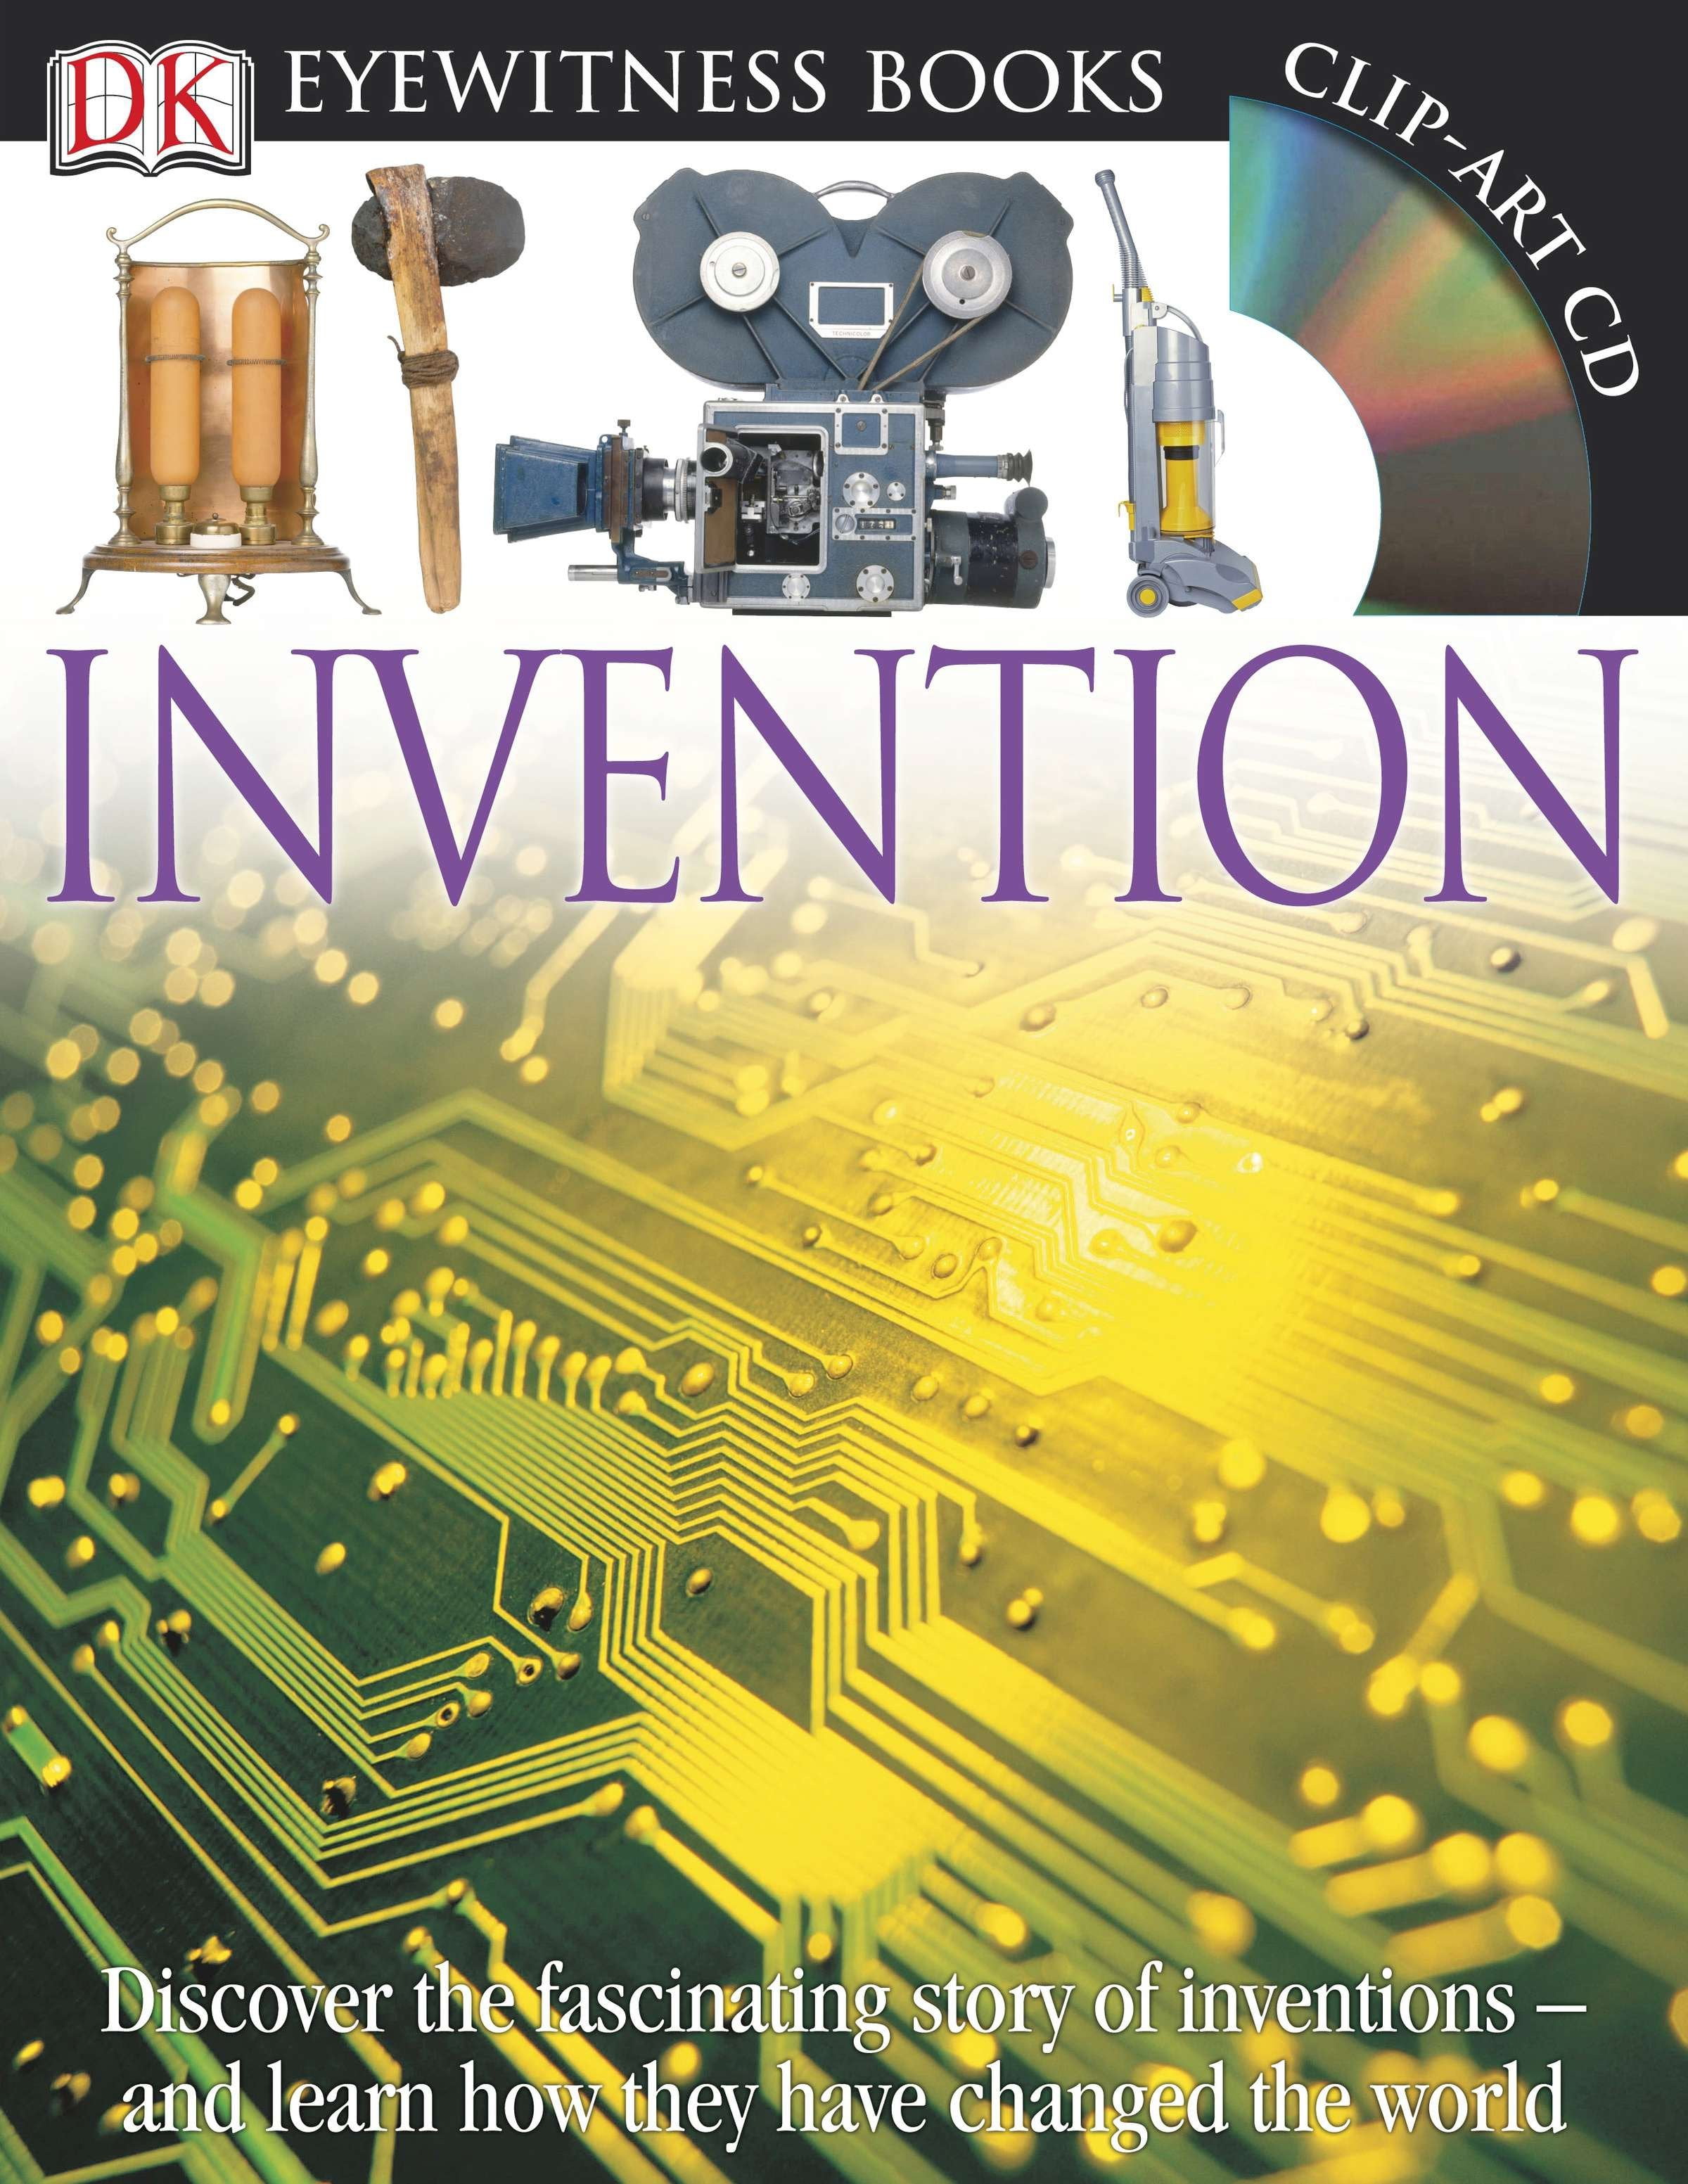 To invent to discover. Dk Eyewitness Invention. Book Inventions. Dk Eyewitness: Invention PB. Invent discover.